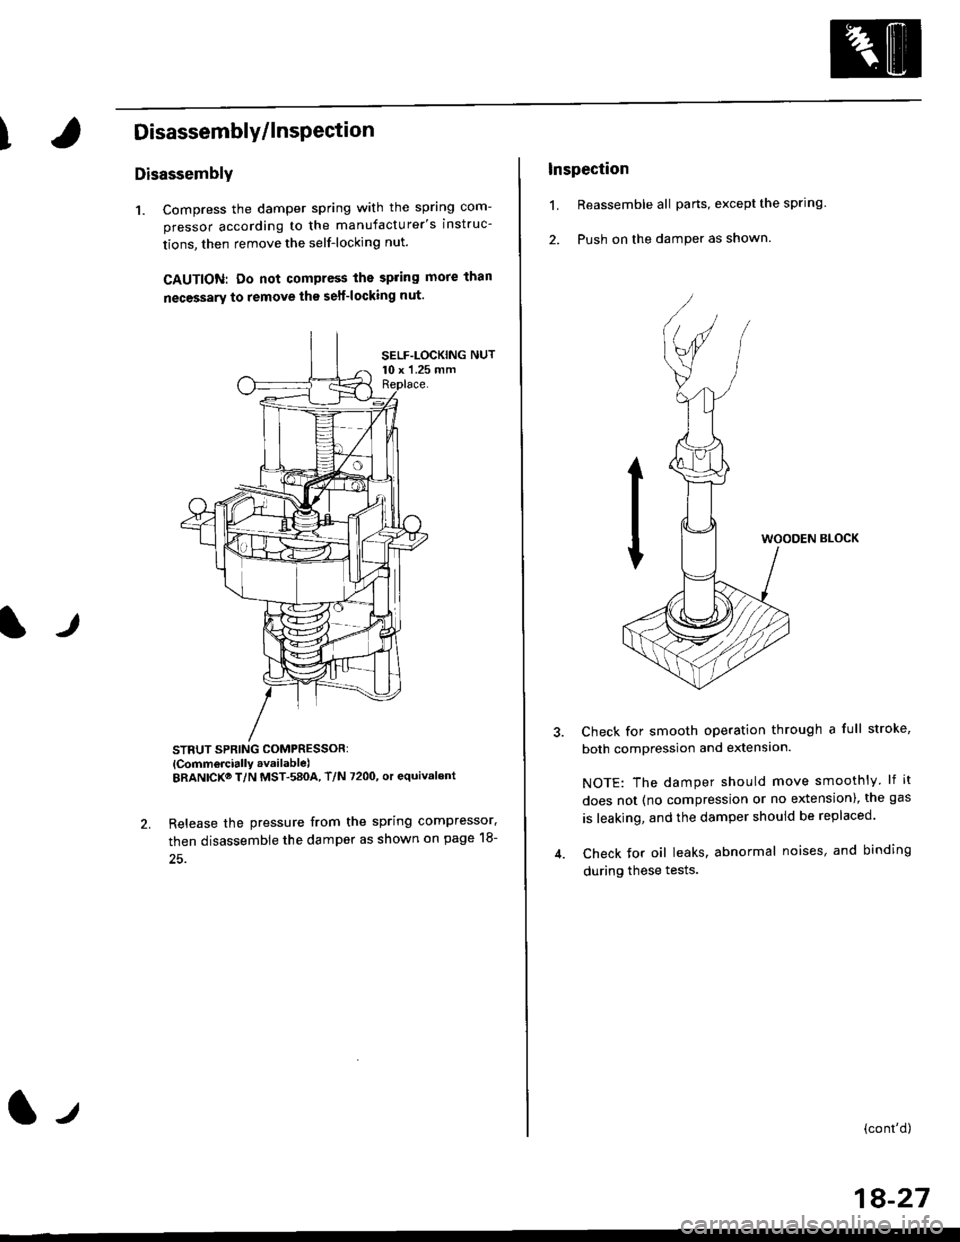 HONDA CIVIC 1996 6.G Workshop Manual IDisassembly/lnsPection
lr
Disassembly
1. Compress the damper spring with the spring com-
pressor according to the manufacturers instruc-
tions, then remove the self-locking nut.
GAUTION: Do not comp